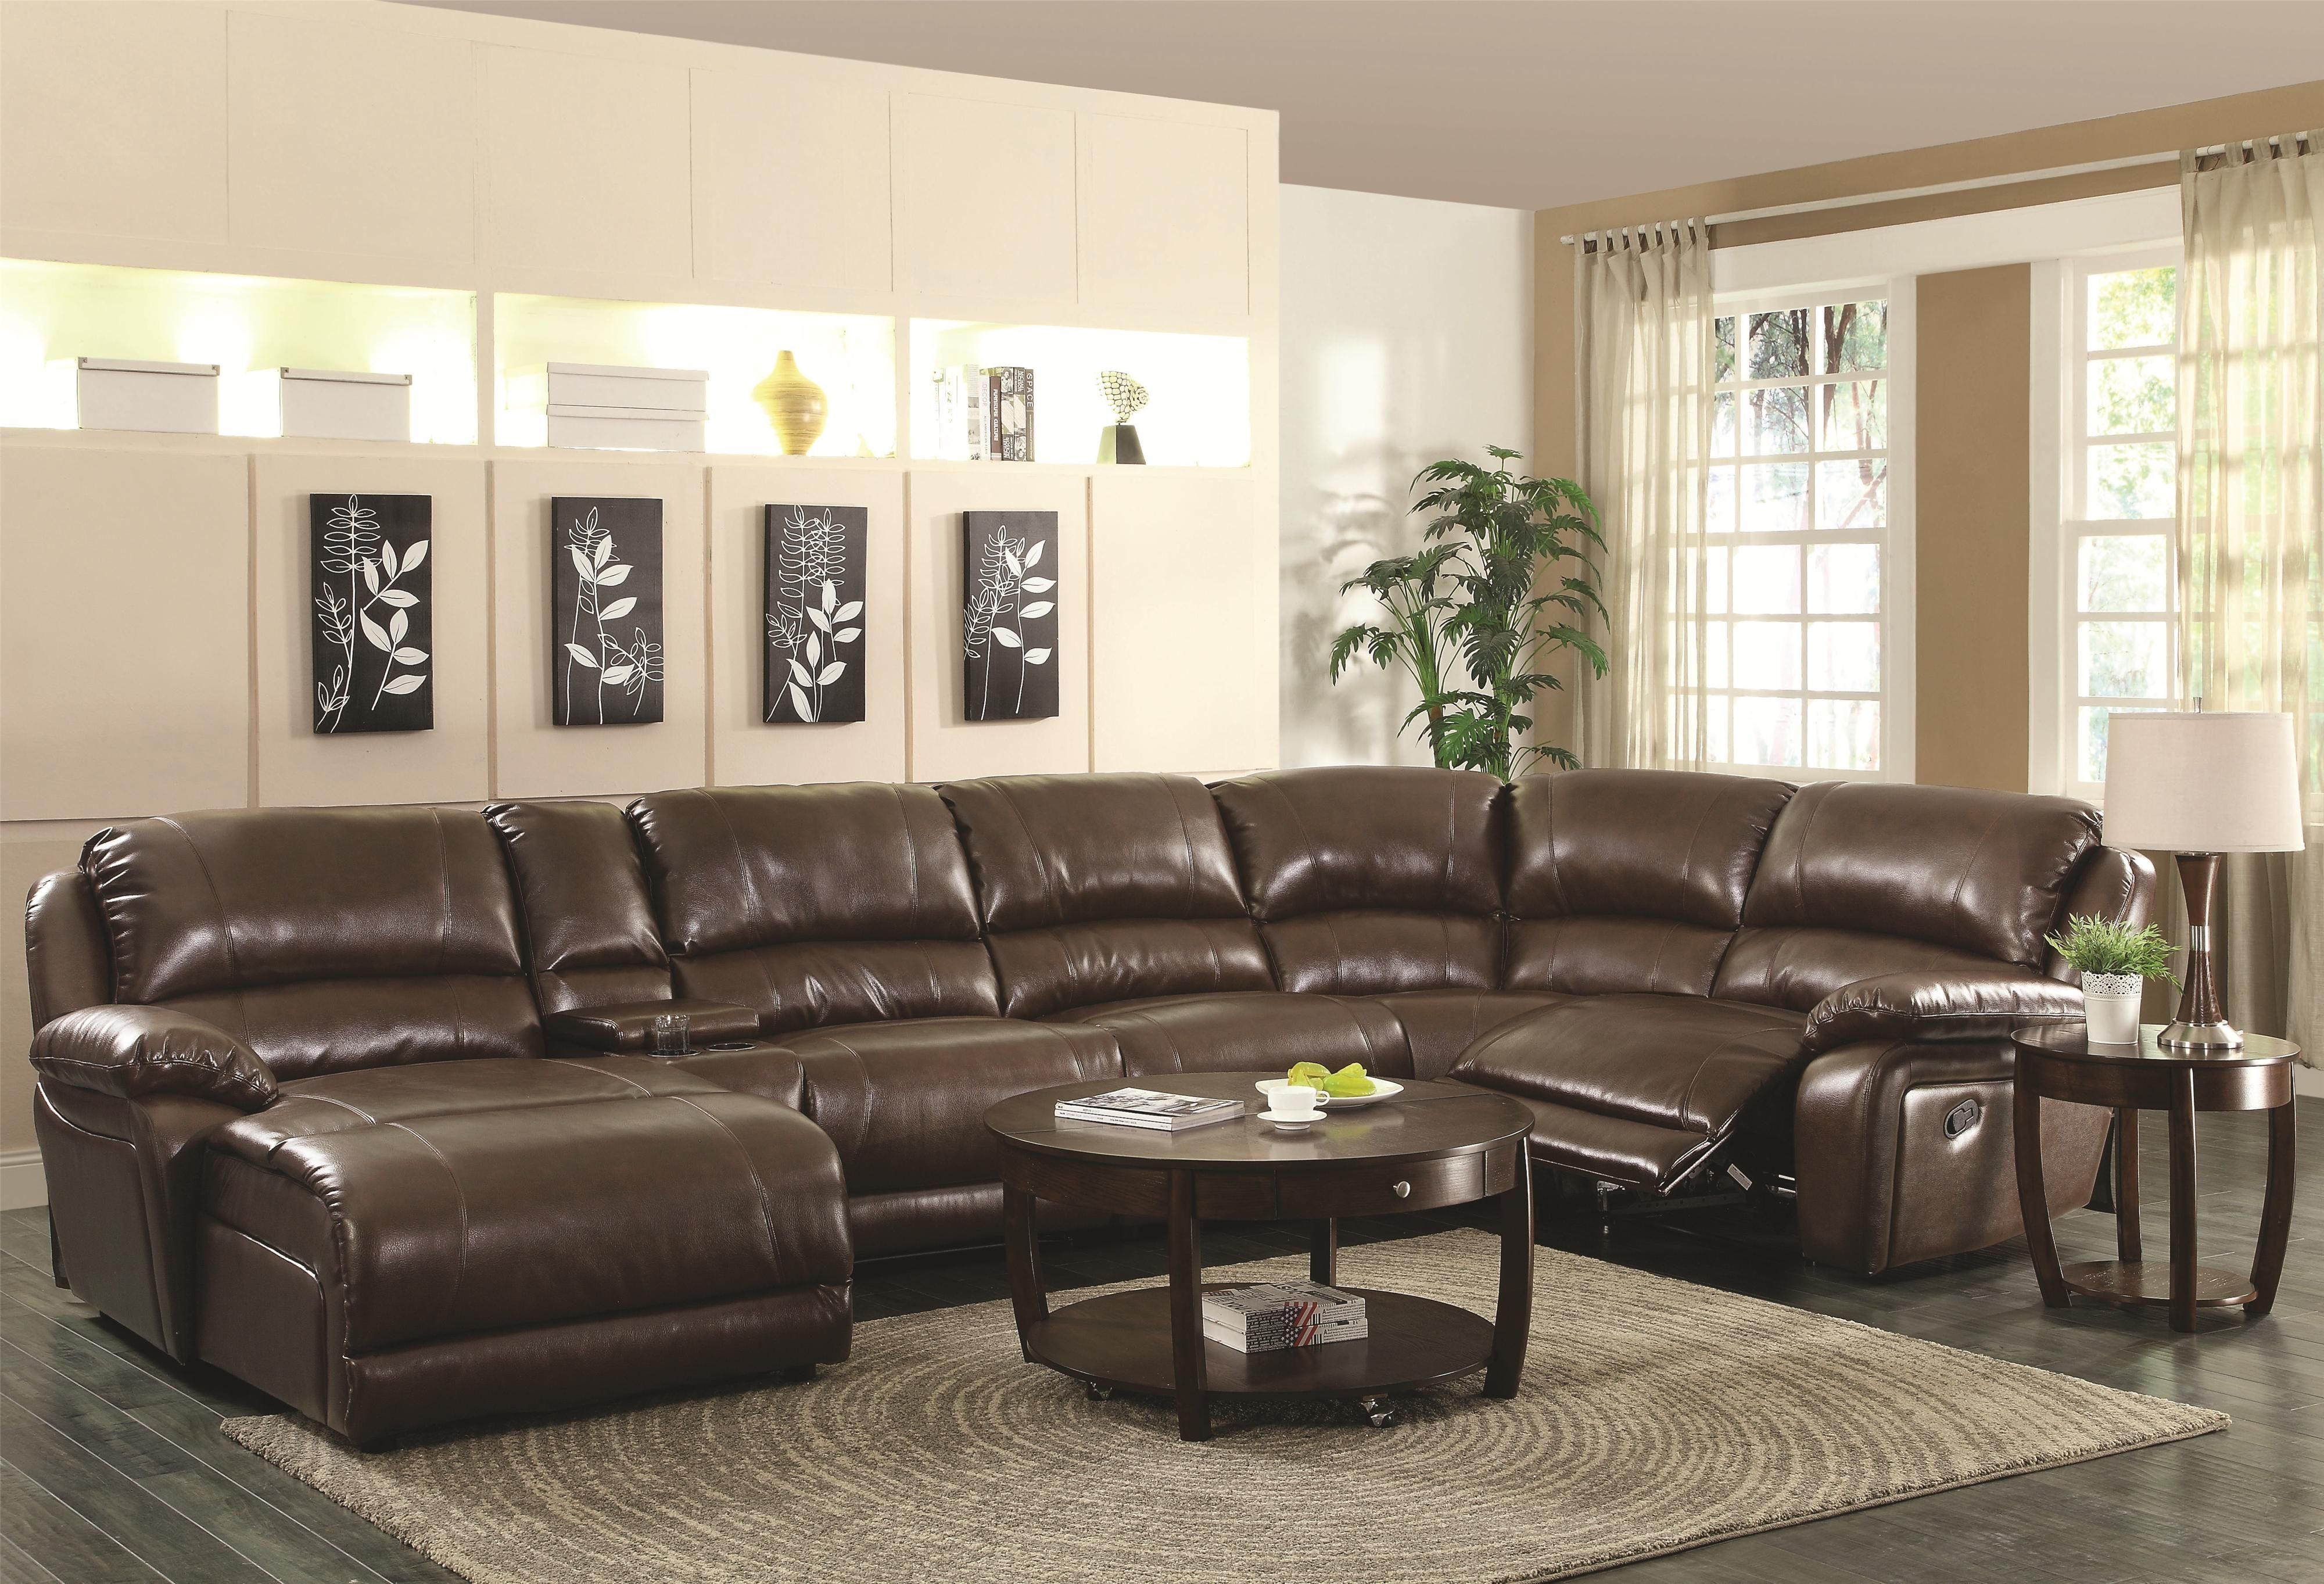 Co Furniture, Leather Sectionals, Living Room, Motion Upholstery Intended For Leather Motion Sectional Sofas (View 7 of 10)